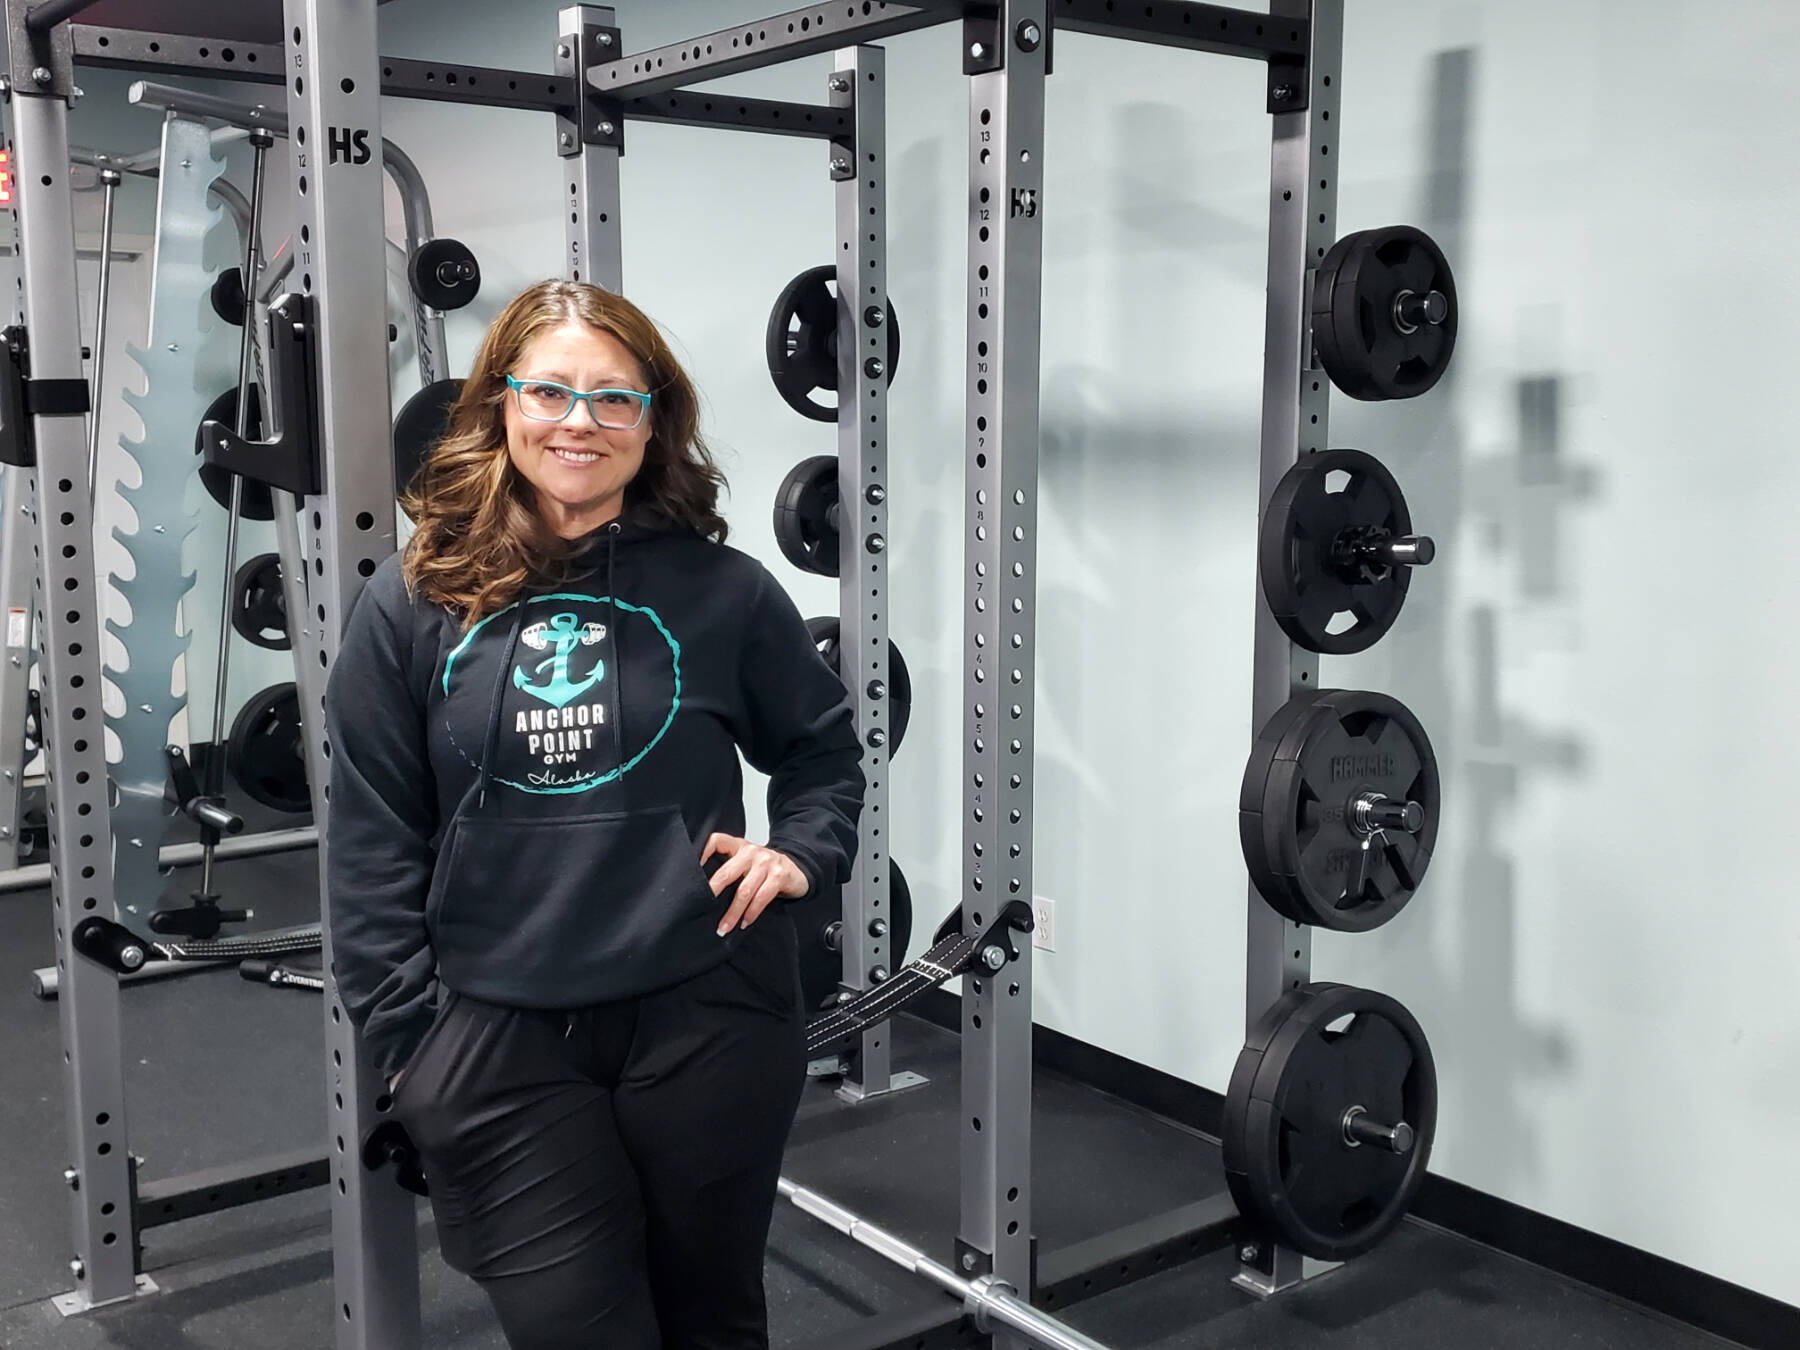 Anchor Point gym owner Heidi Cox is photographed by new weightlifting equipment during the gym’s grand opening on Friday, Nov. 10, 2023 in Anchor Point, Alaska. (Delcenia Cosman/Homer News)